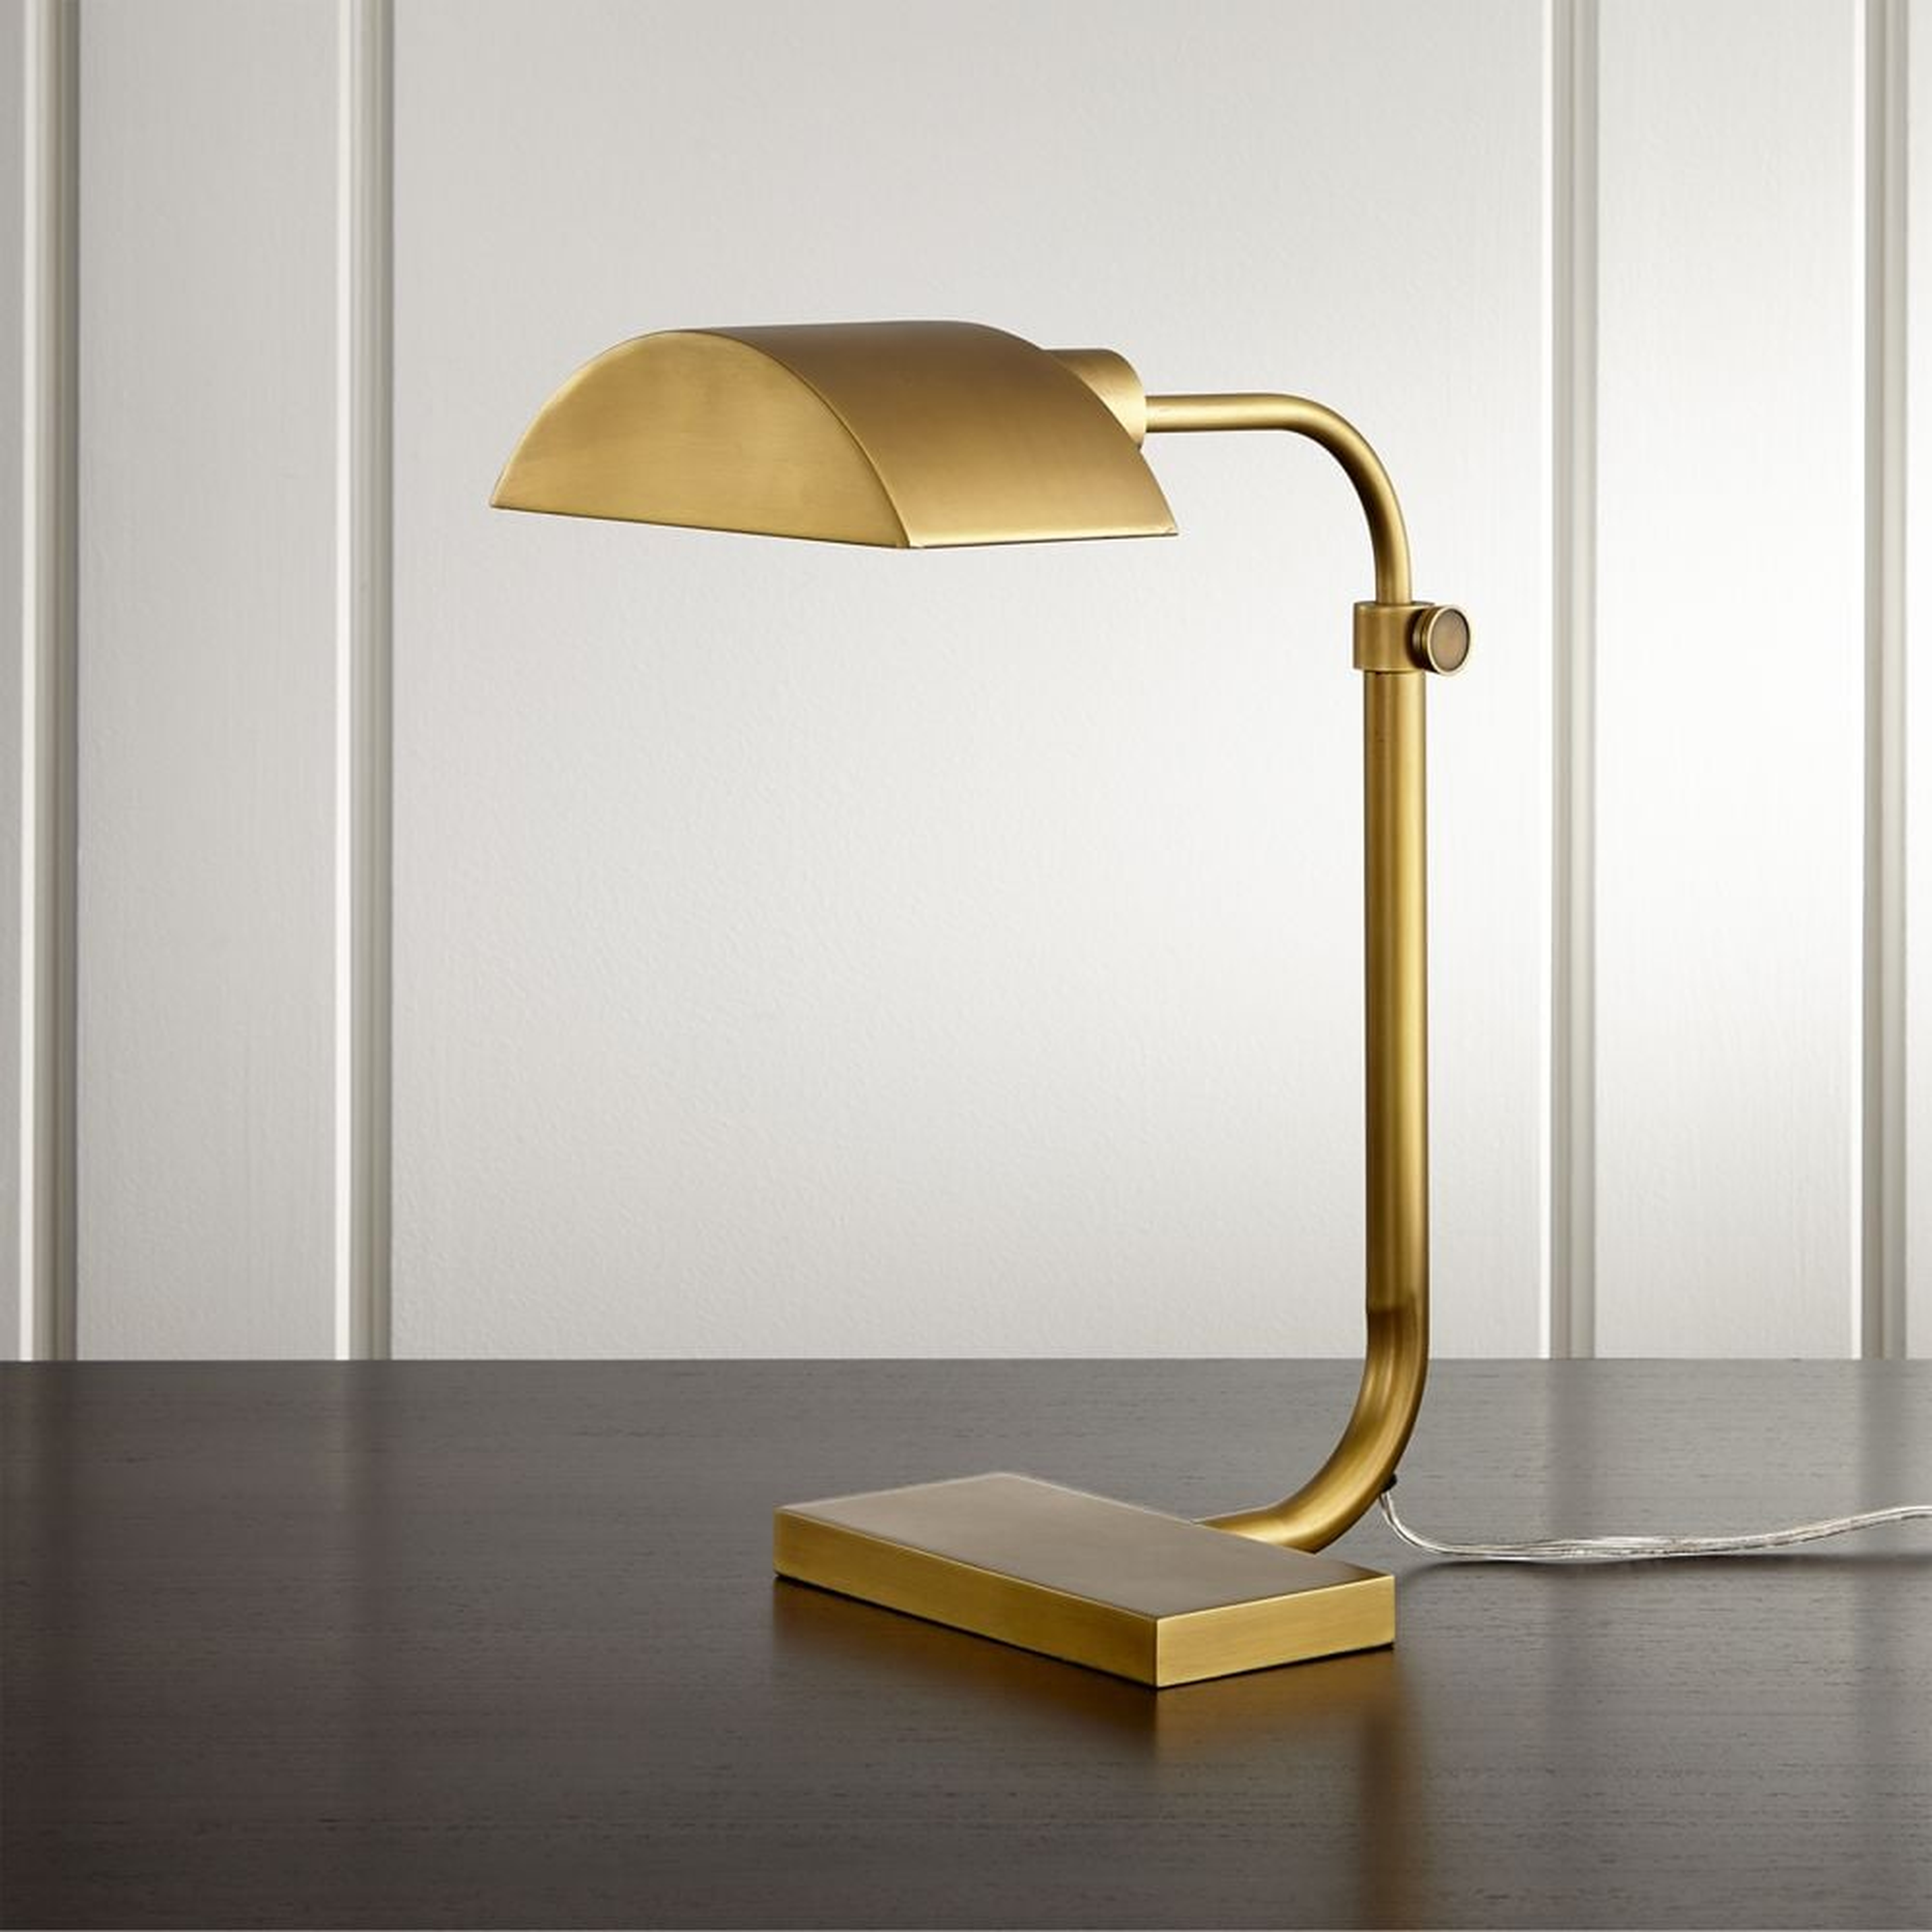 Theorem Aged Brass Desk Lamp - Crate and Barrel